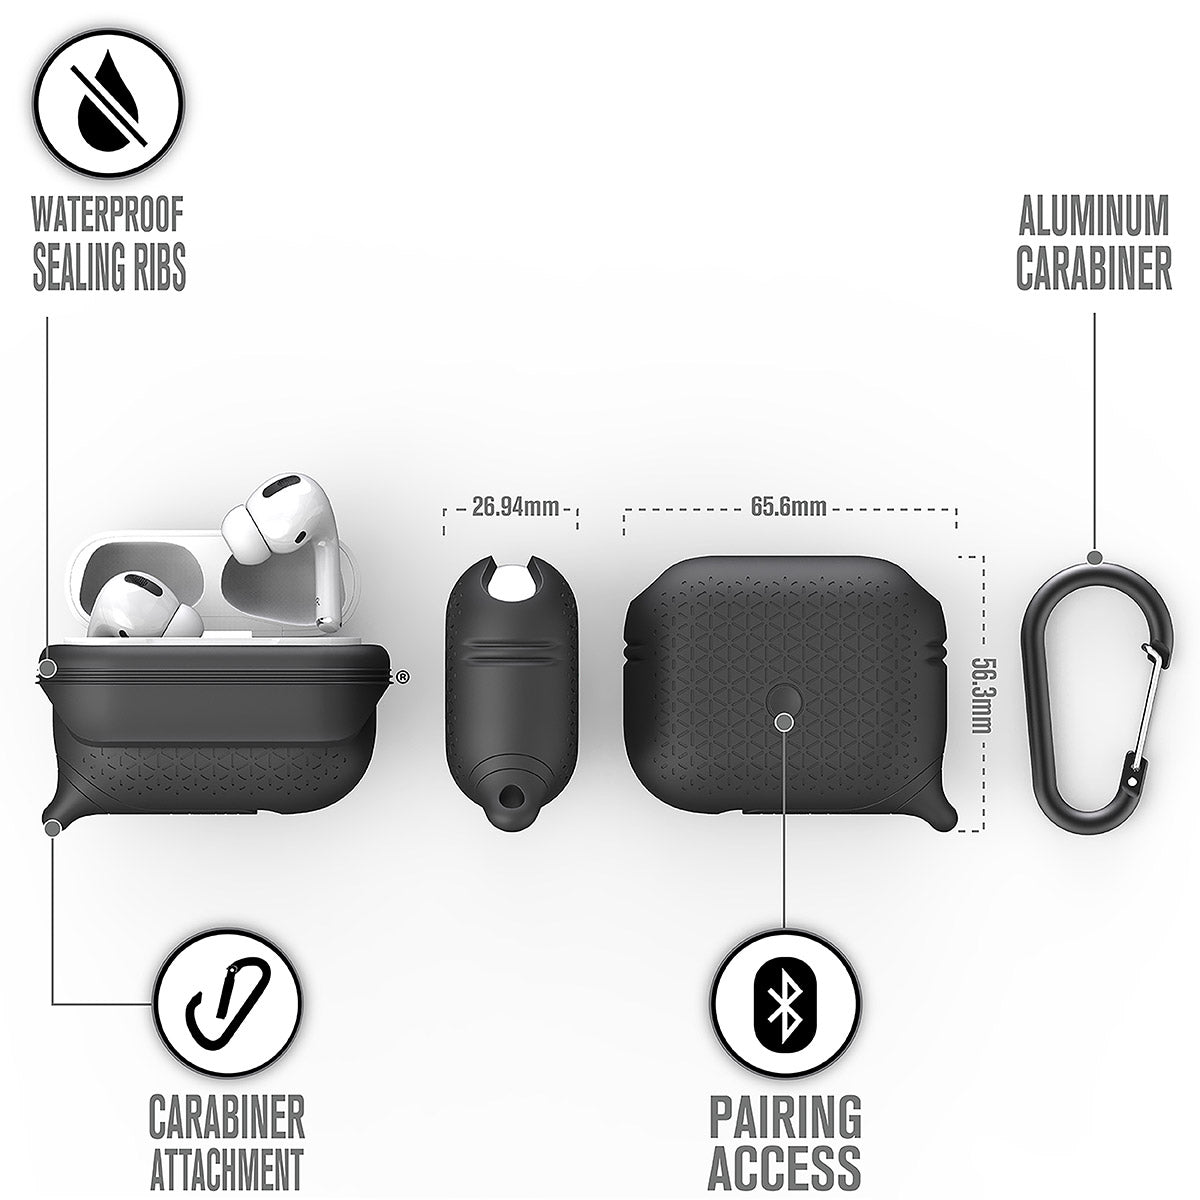 catalyst airpods pro gen 2 1 waterproof case carabiner premium edition stealth black different views showing the sealing ribs carabiner attachment loop and pairing access text reads waterproof sealing ribs aluminum carabiner carabiner attachment pairing access